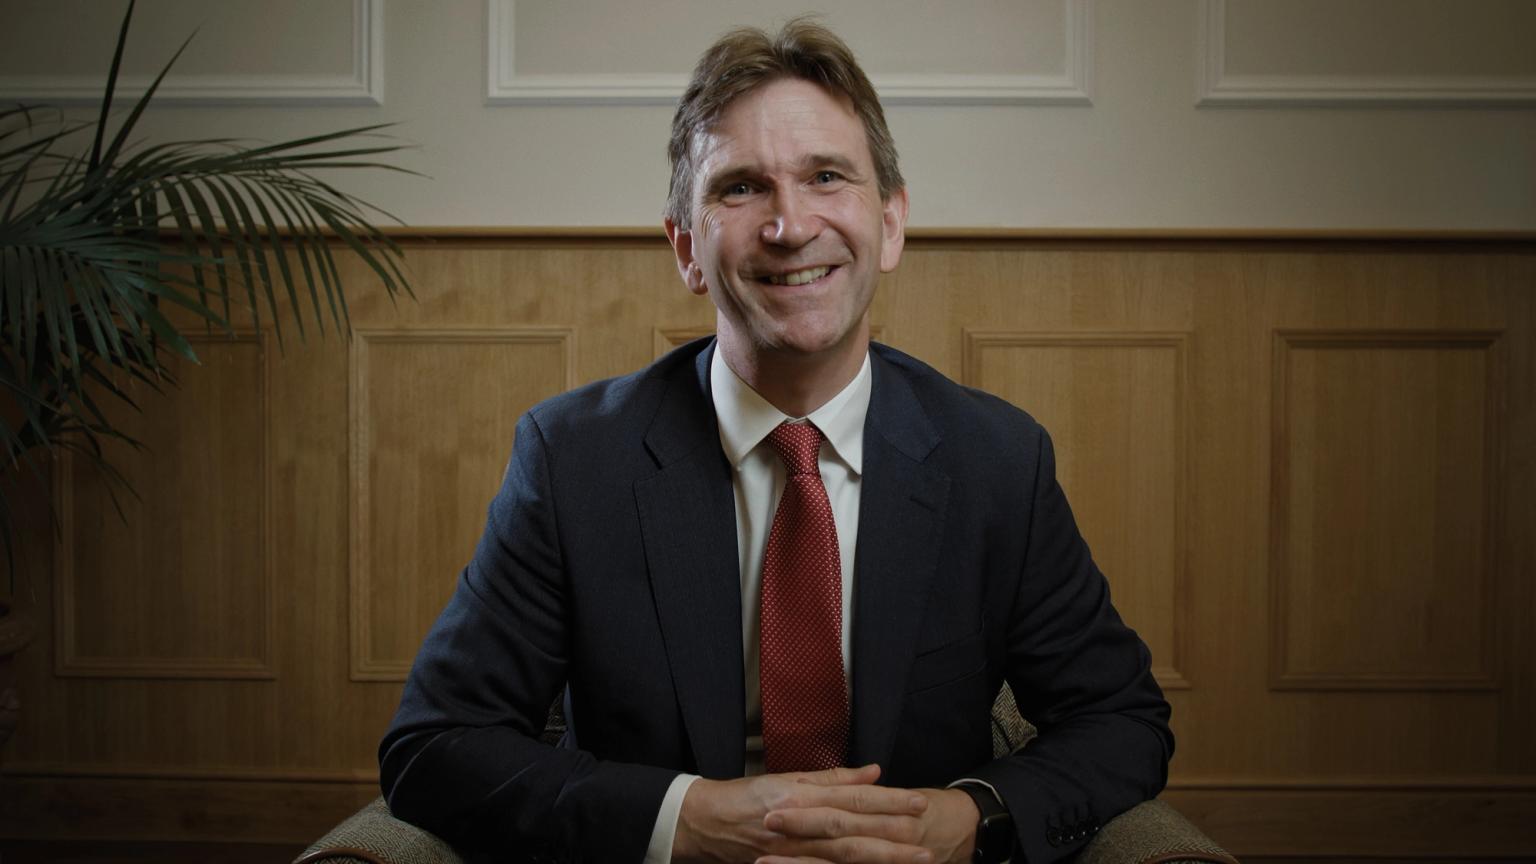 Image of a man, the CEO of Mill Hill Education Group, seated down, wearing a suit and smiling